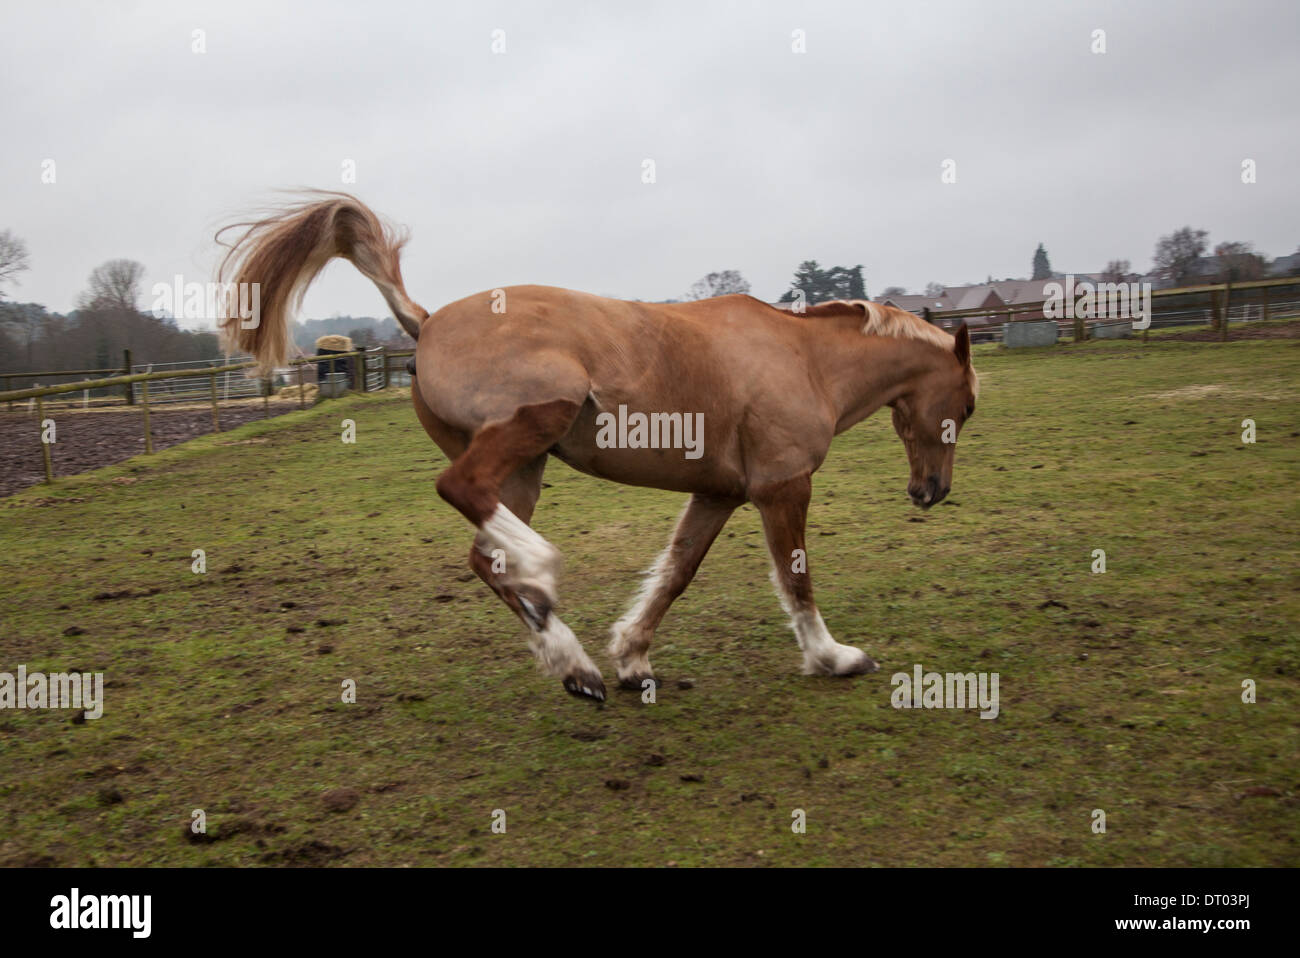 brown horse, jumping around freely in its' field Stock Photo